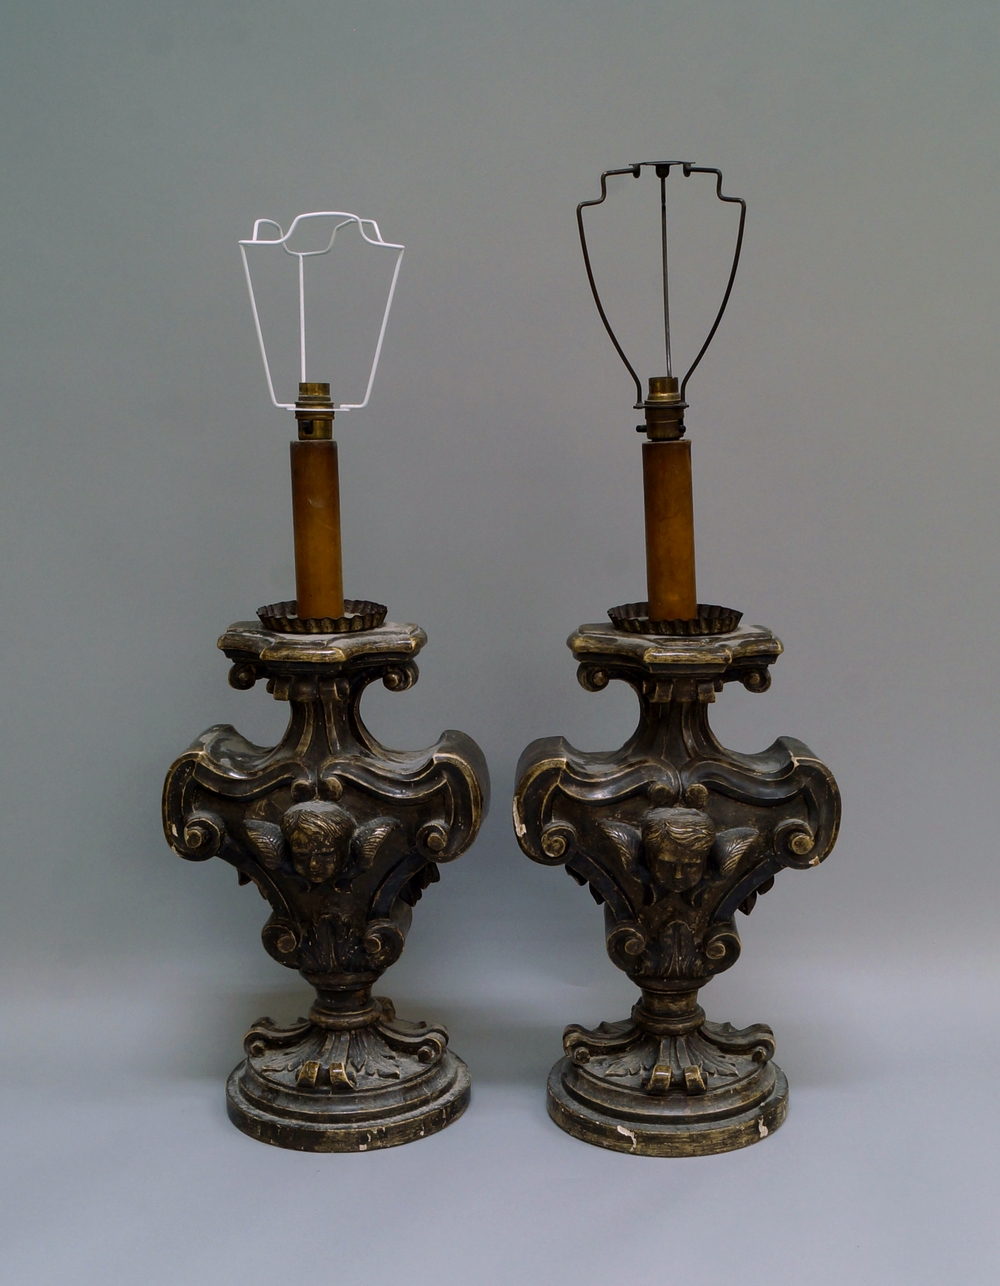 A pair of Italian or Spanish silvered wood candlesticks, late 19th/20th century, of scrolling